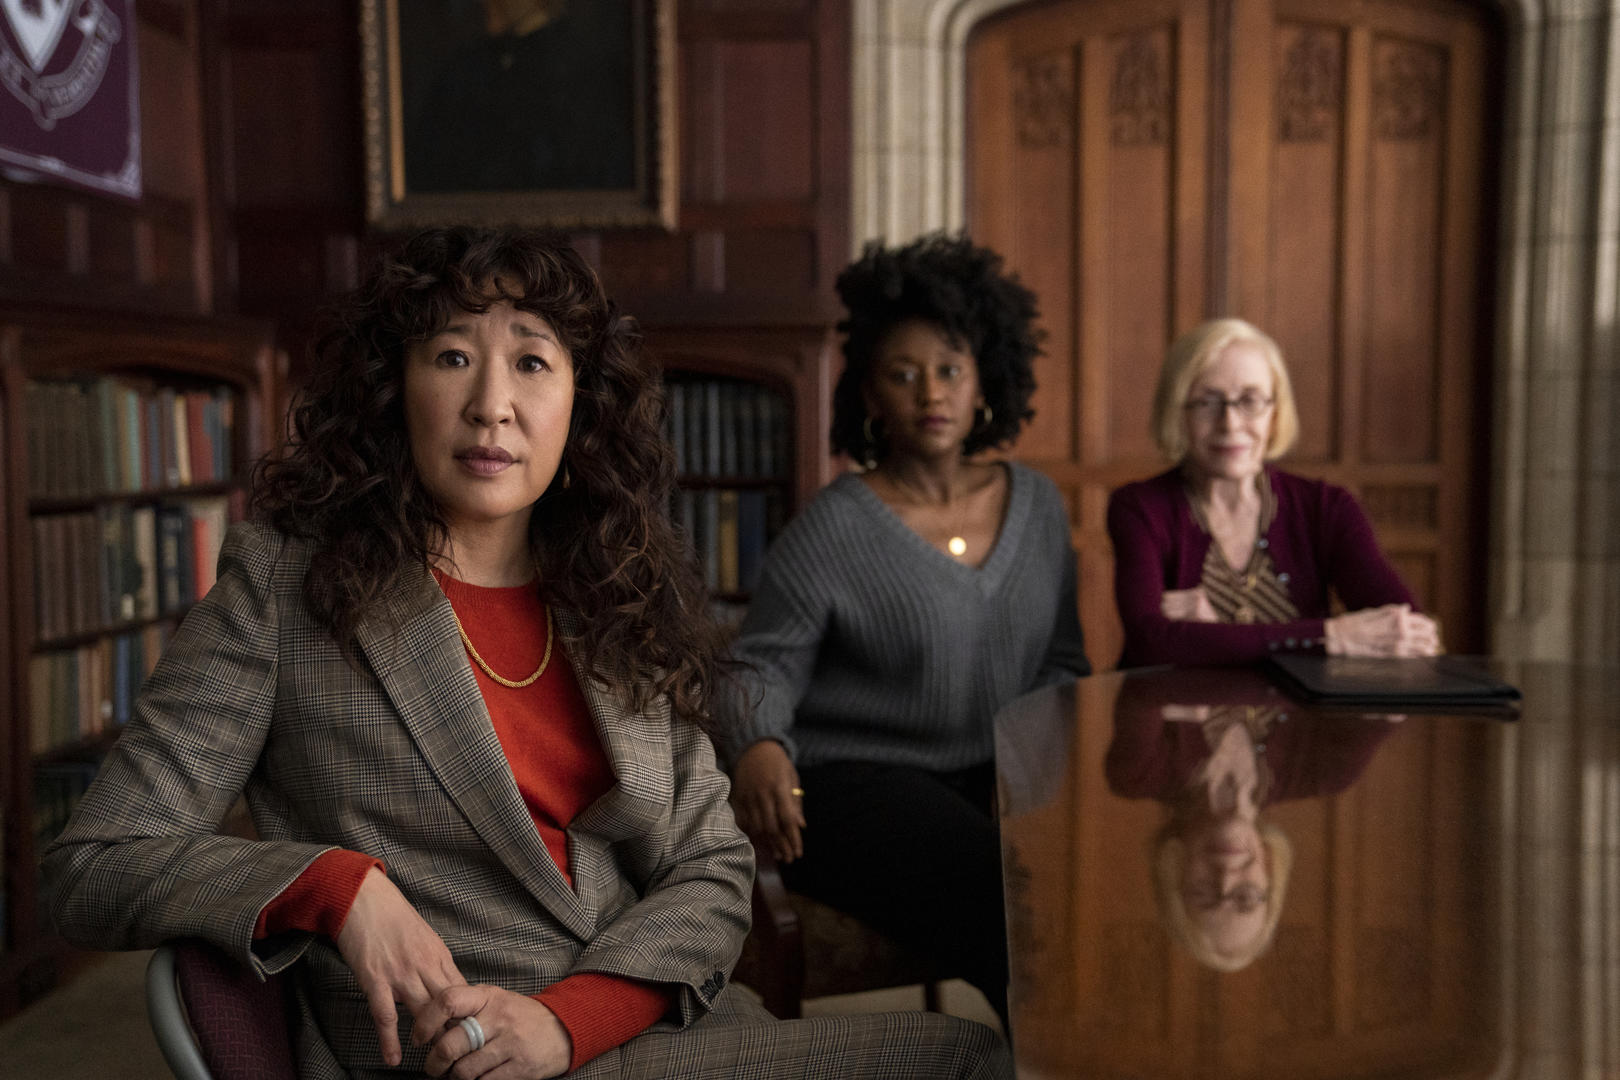 NETFLIX UNVEILS SNEAK PEAK OF ALL-NEW COMEDY “THE CHAIR,” STARRING SANDRA OH AND DEBUTING AUG. 20